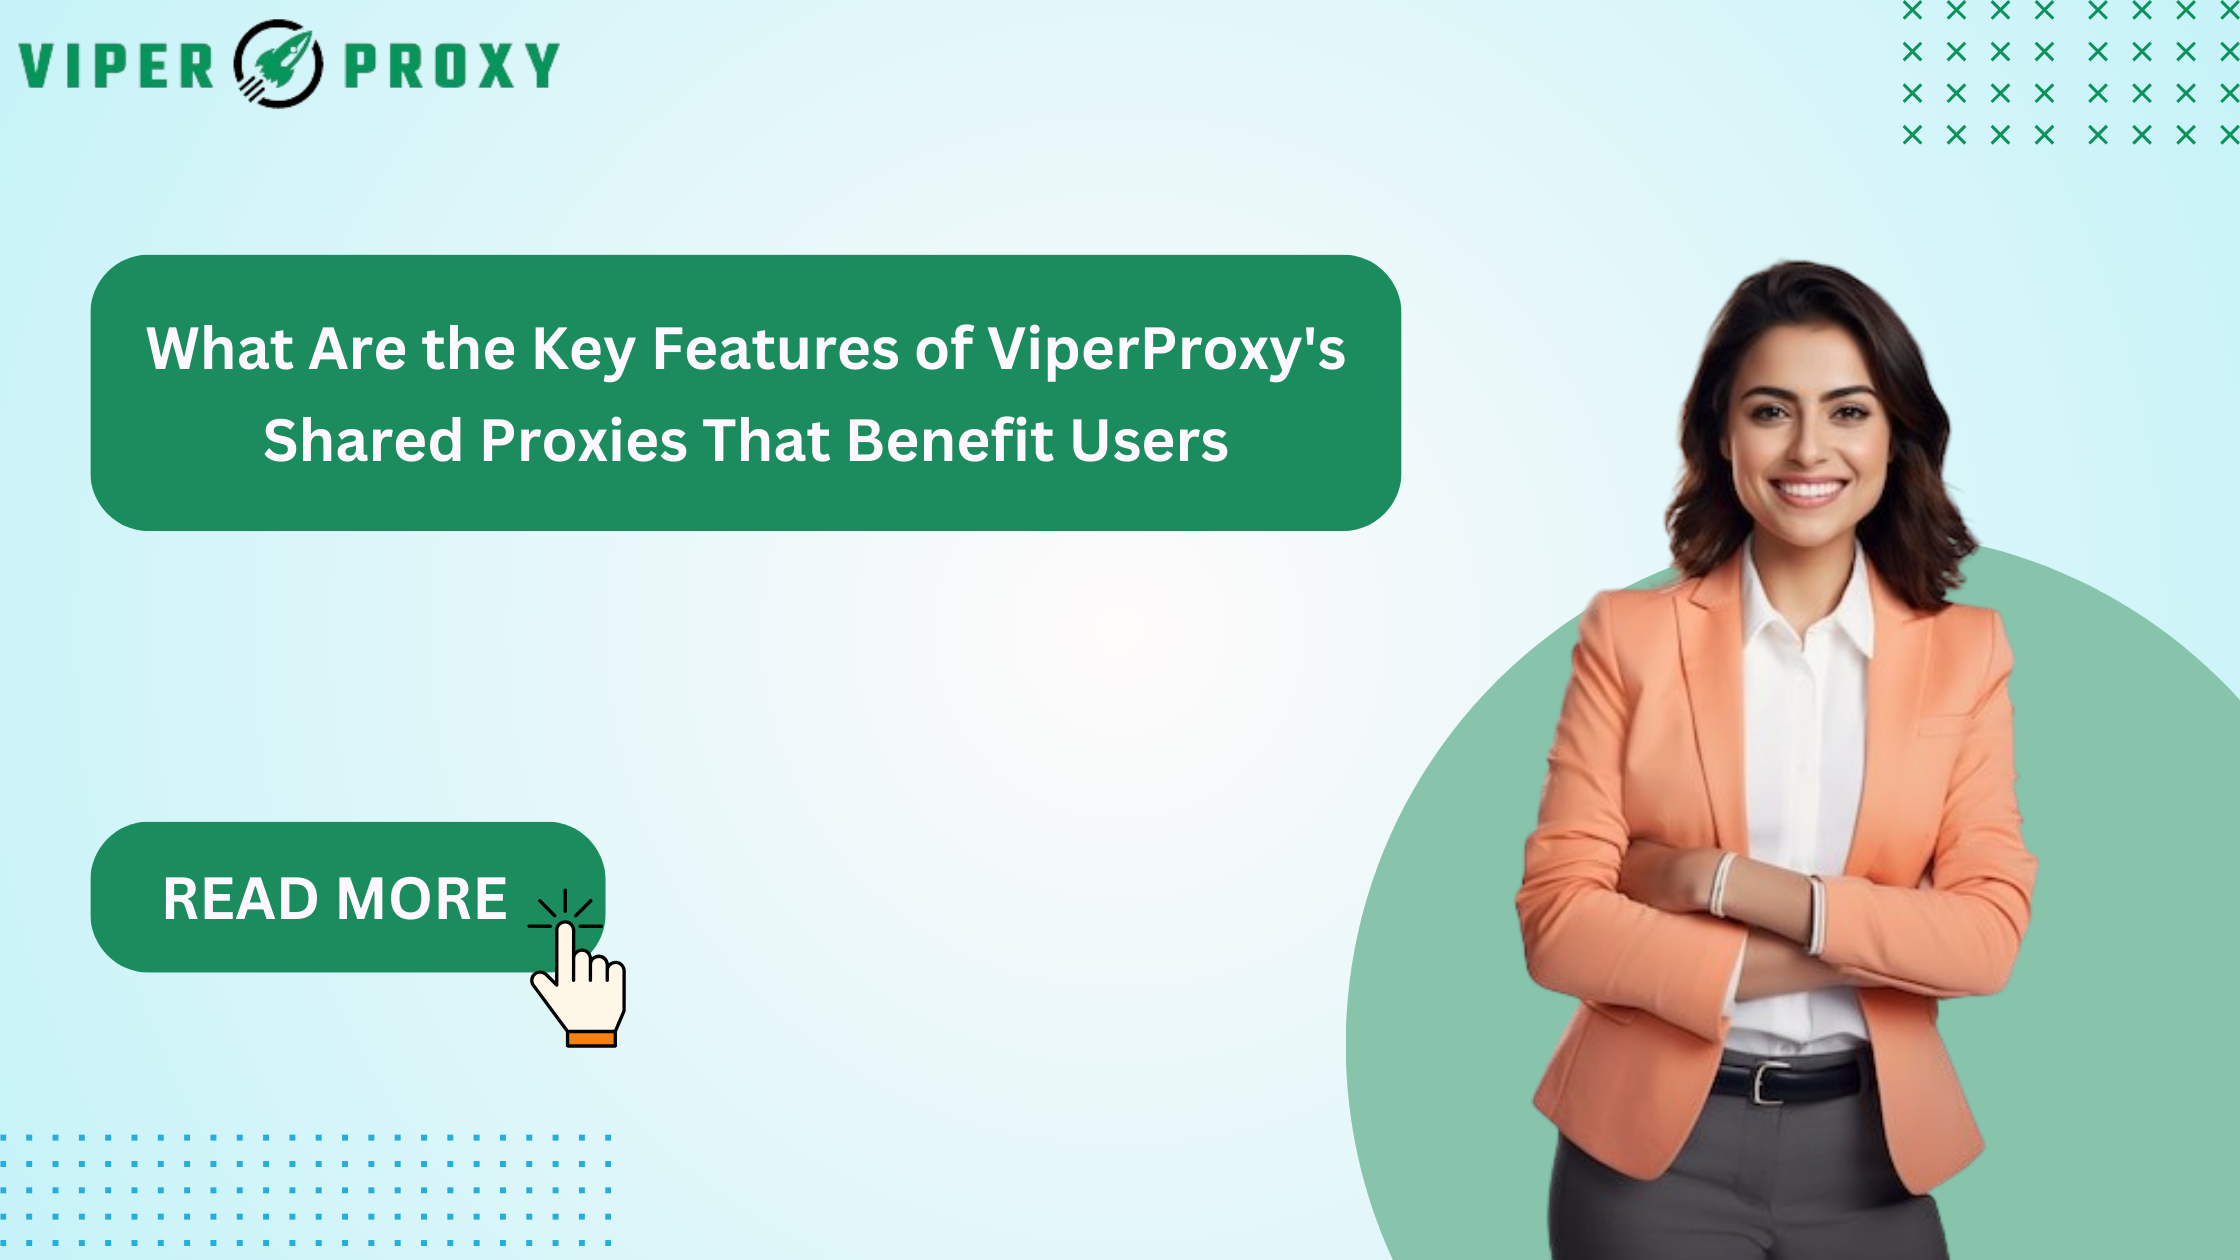 What Are the Key Features of ViperProxy's Shared Proxies That Benefit Users